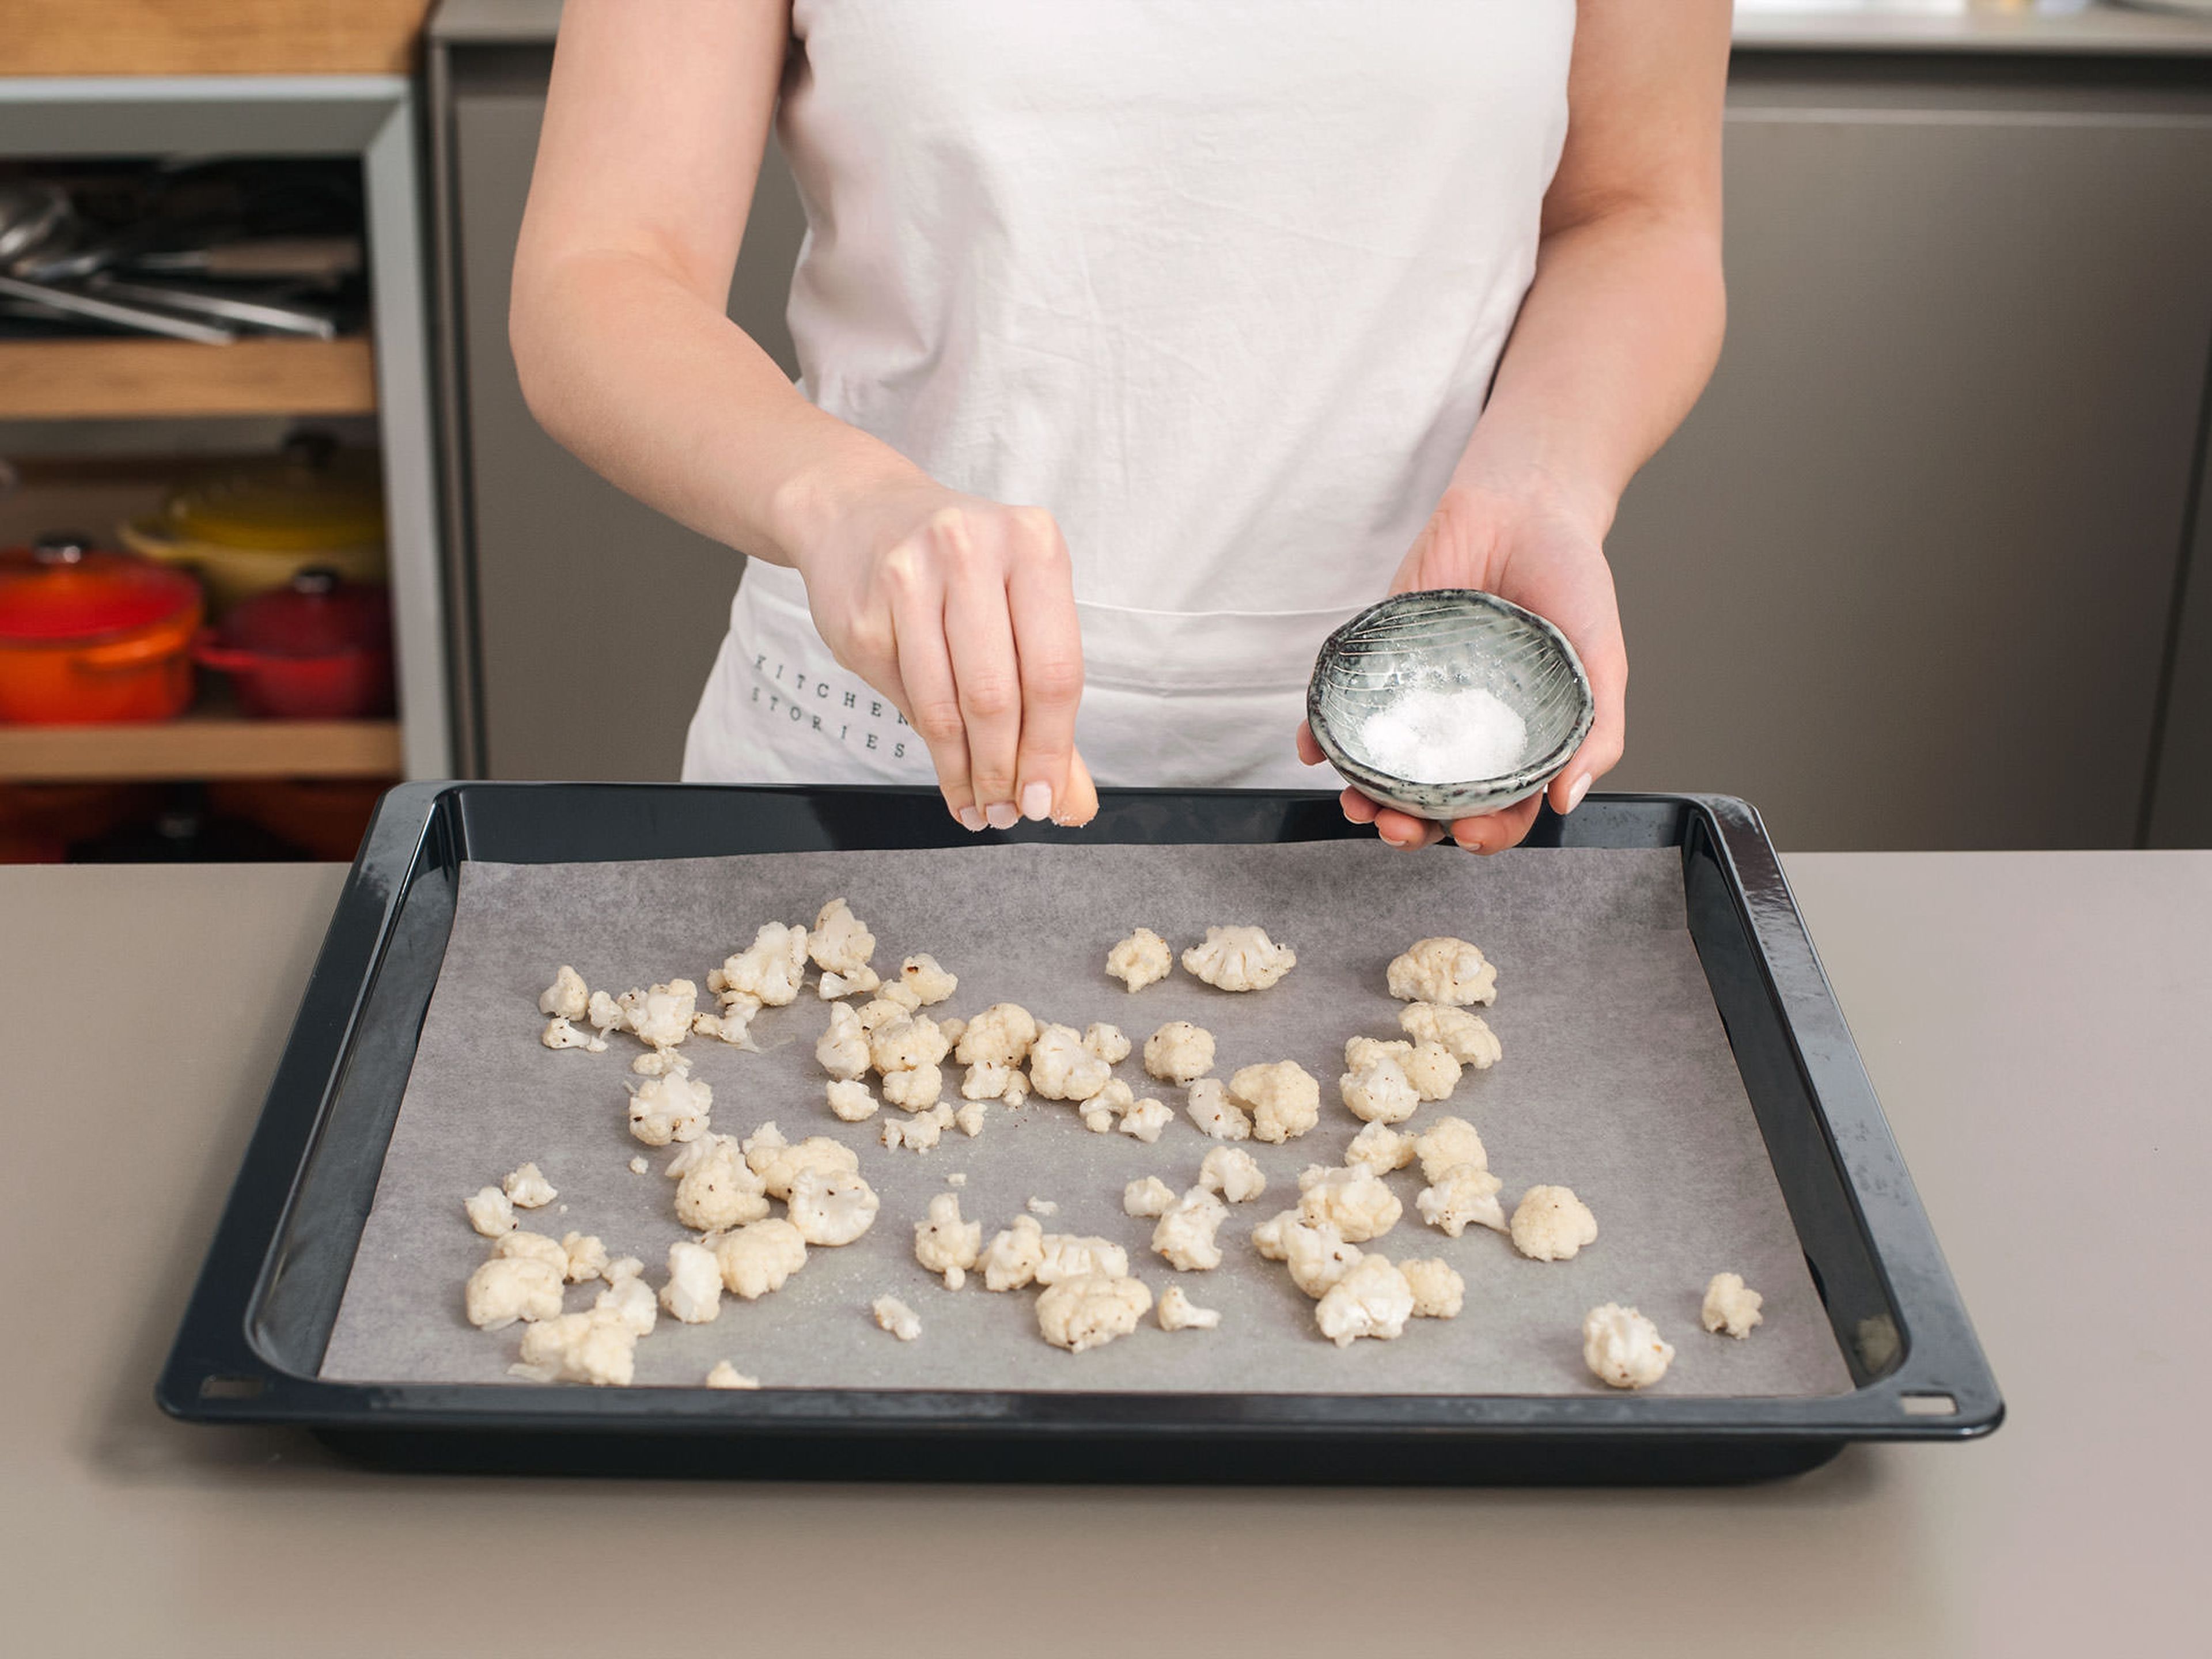 Meanwhile, line a baking sheet with parchment paper. Spread cauliflower florets evenly over baking sheet, drizzle with olive oil, and season with salt and pepper to taste. Bake at 200°C/400°F for approx. 12 min. Set aside.